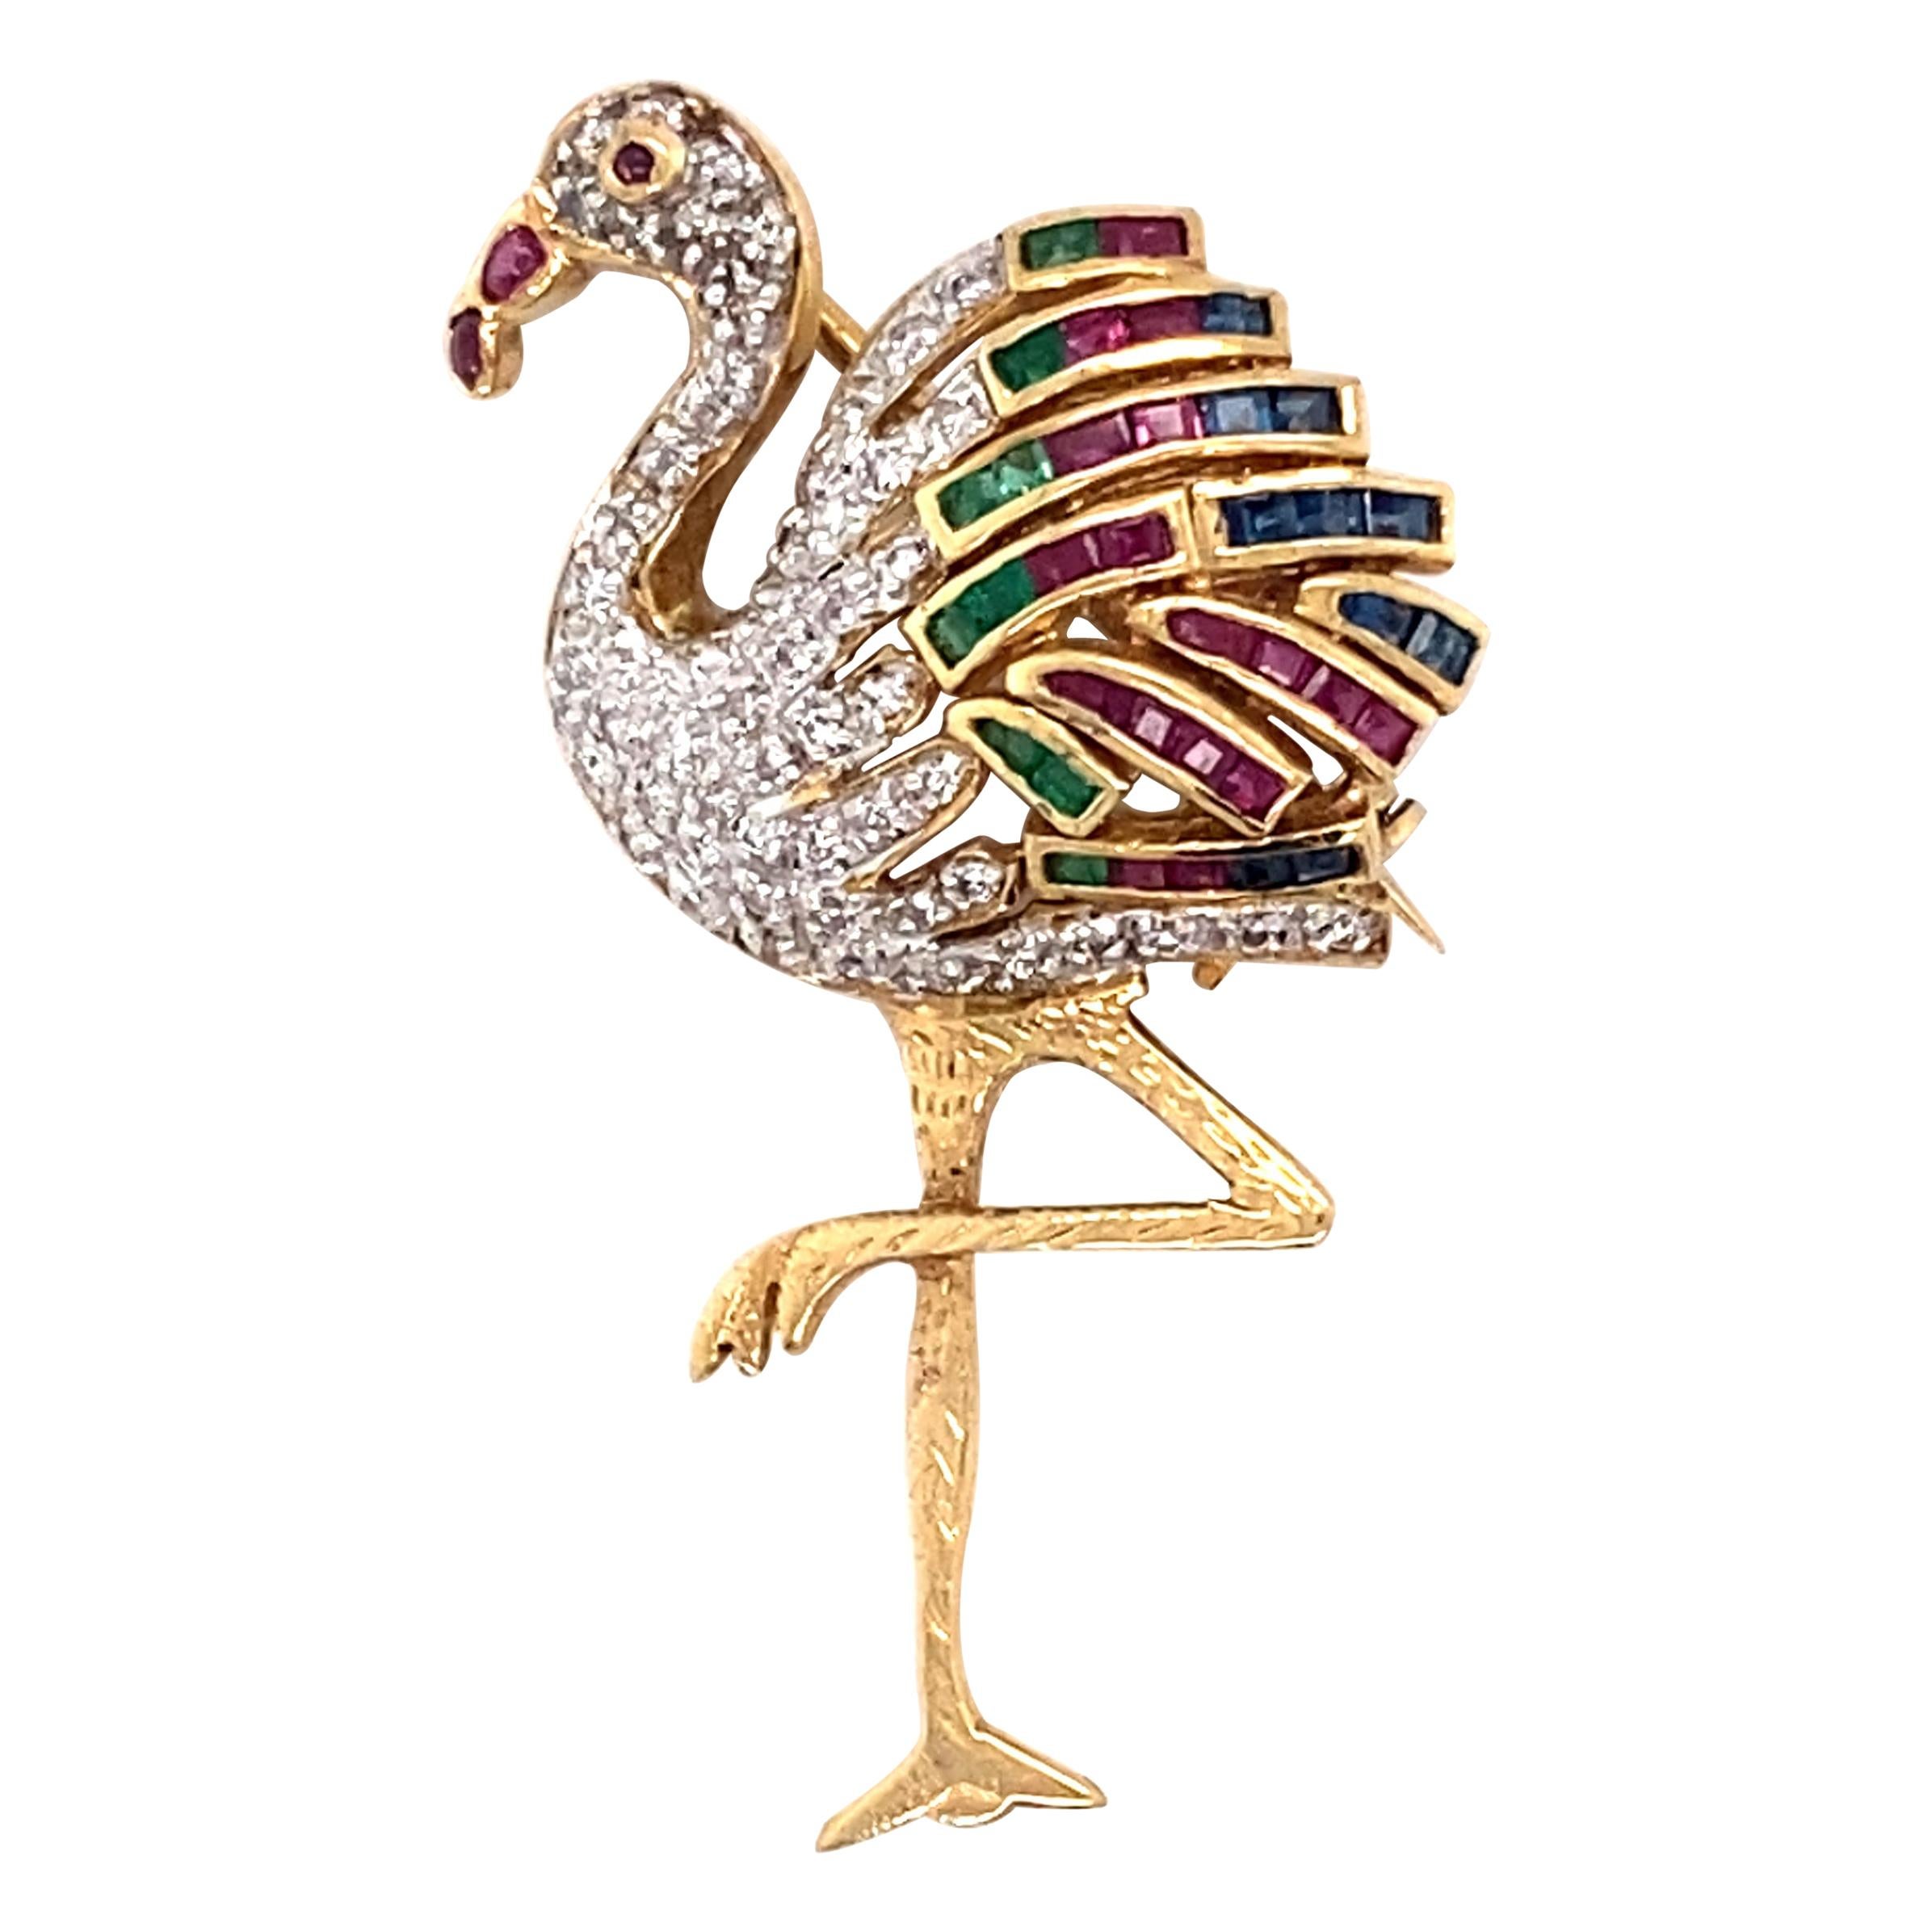 1970s Flamingo Pin featuring Ruby, Sapphire, Emerald in 18 Karat Yellow Gold For Sale